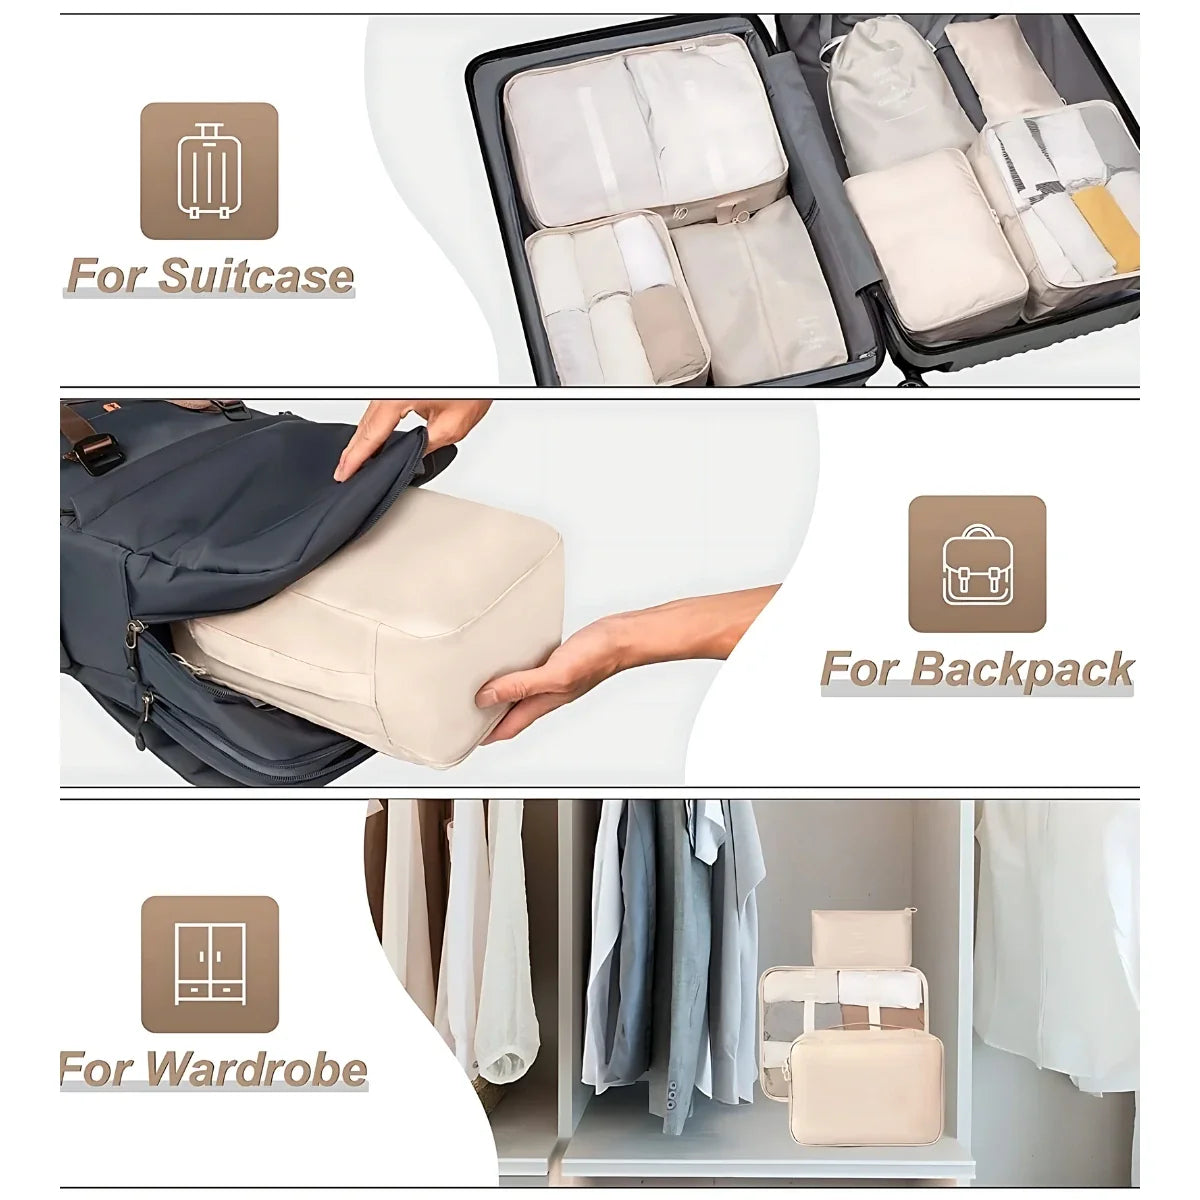 Packing Cubes for Travel (7 Piece Set)